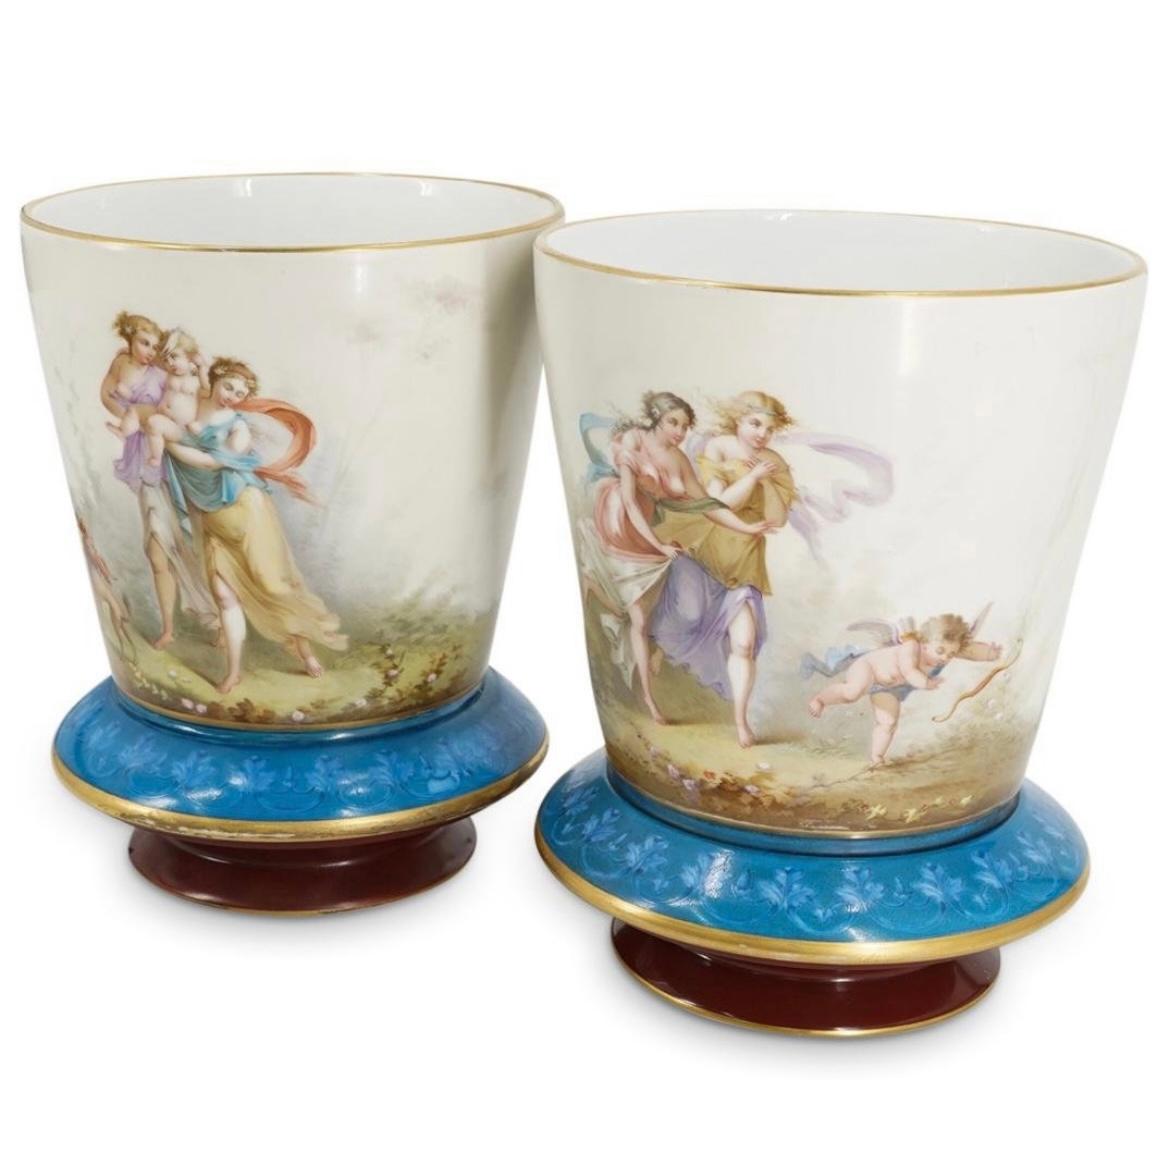 Neoclassical Revival Baccarat Enameled Opaline Glass Jardinieres Cachepots / Vases For Sale